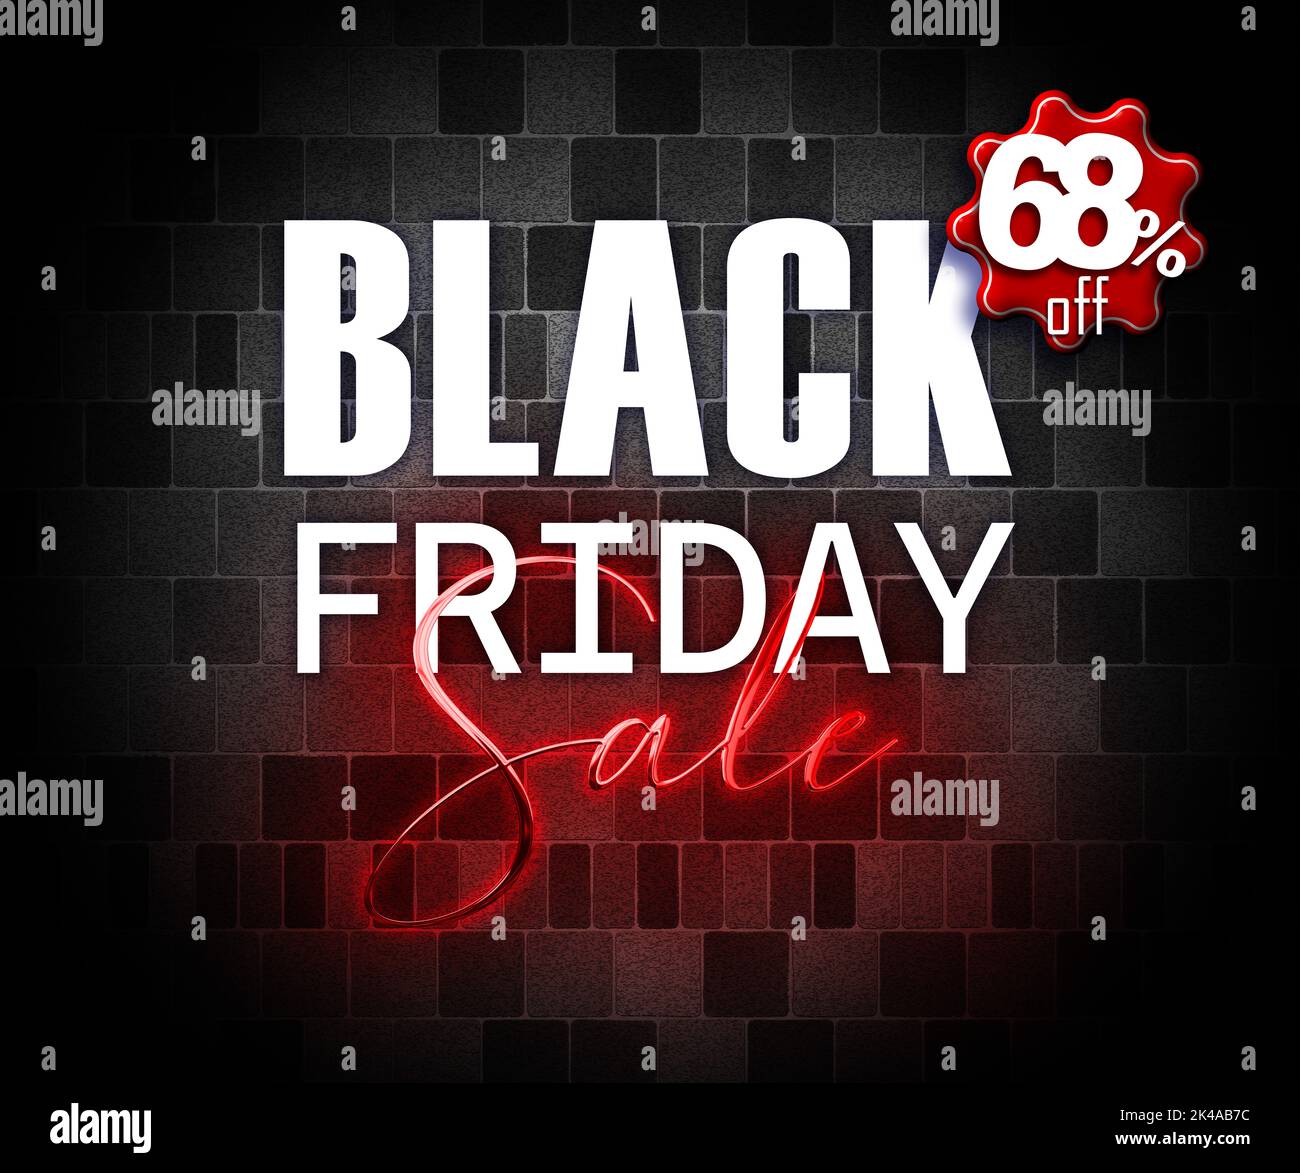 illustration with 3d elements black friday promotion banner 68 percent off sales increase Stock Photo